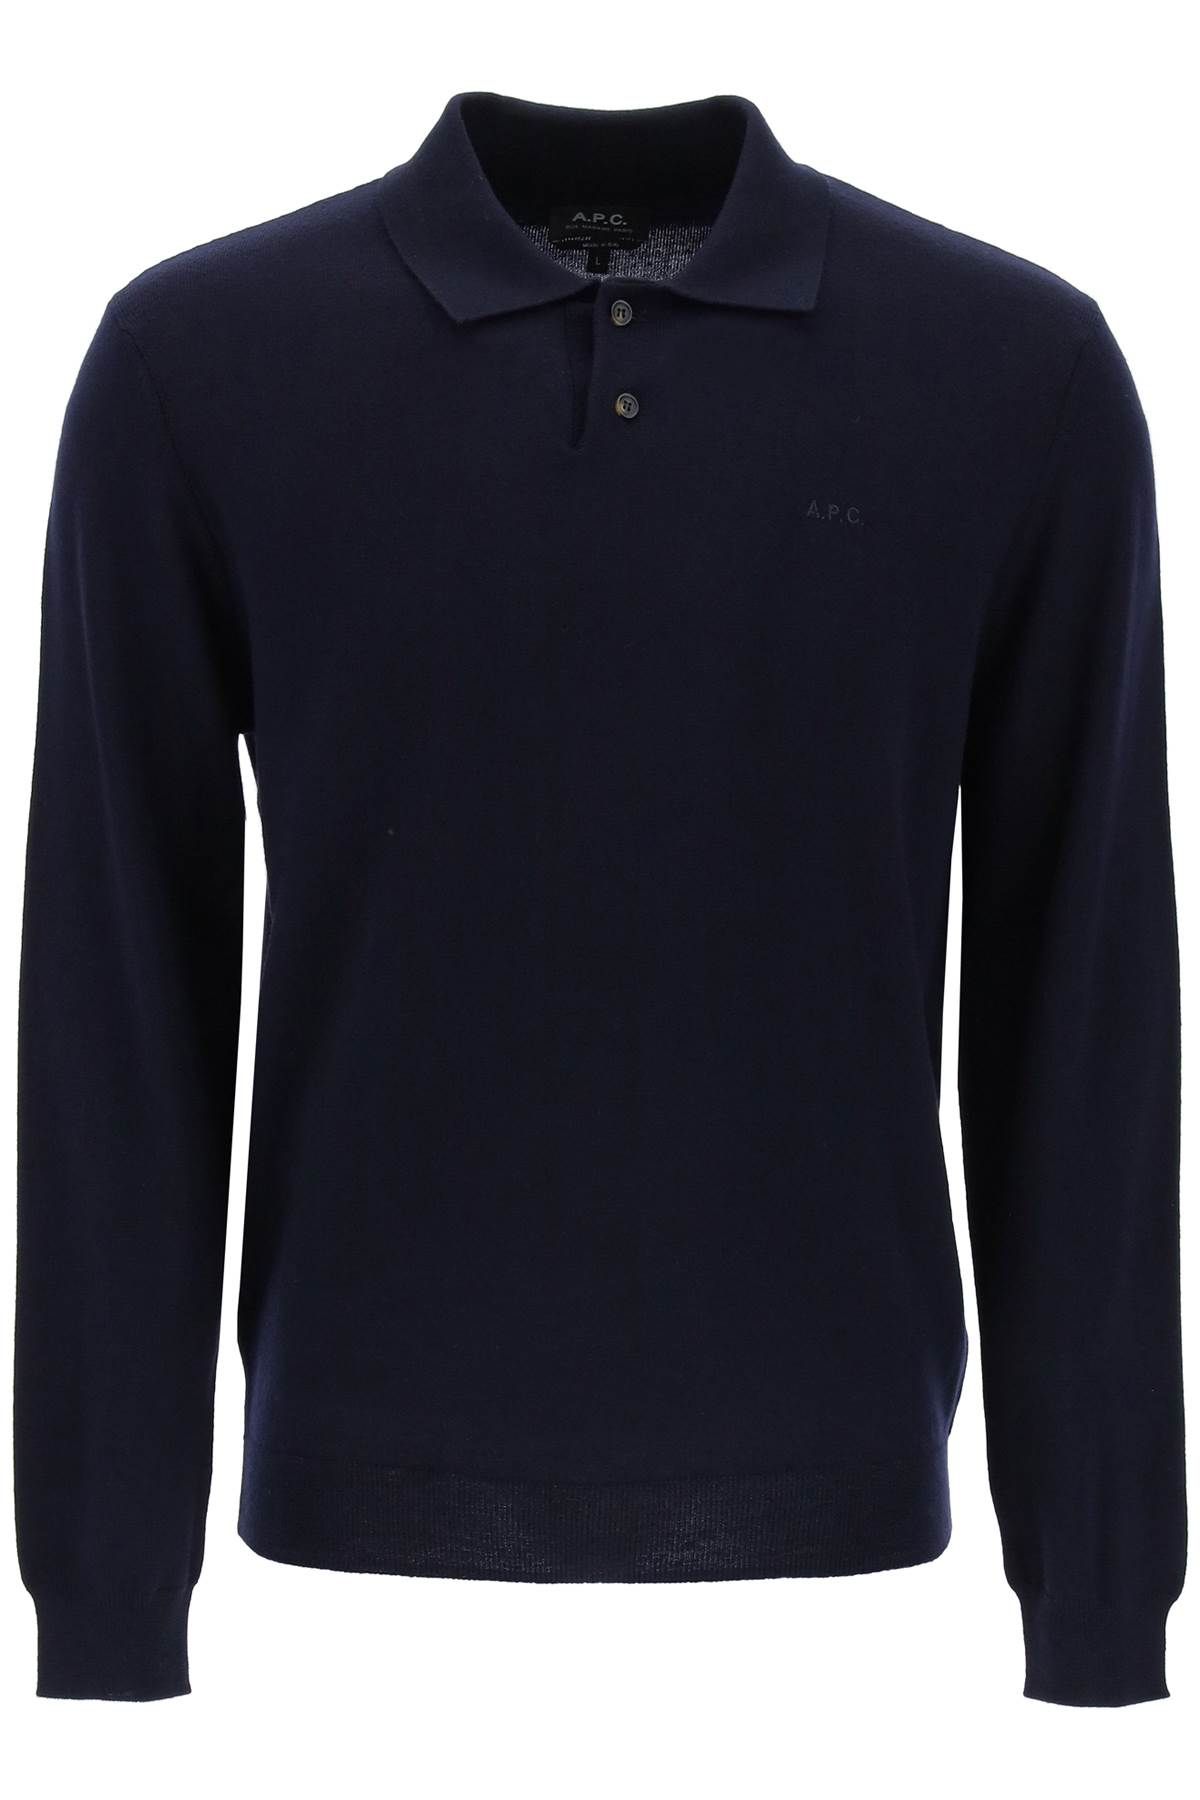 A.P.C. A. P.C. jacob wool pullover polo sweater